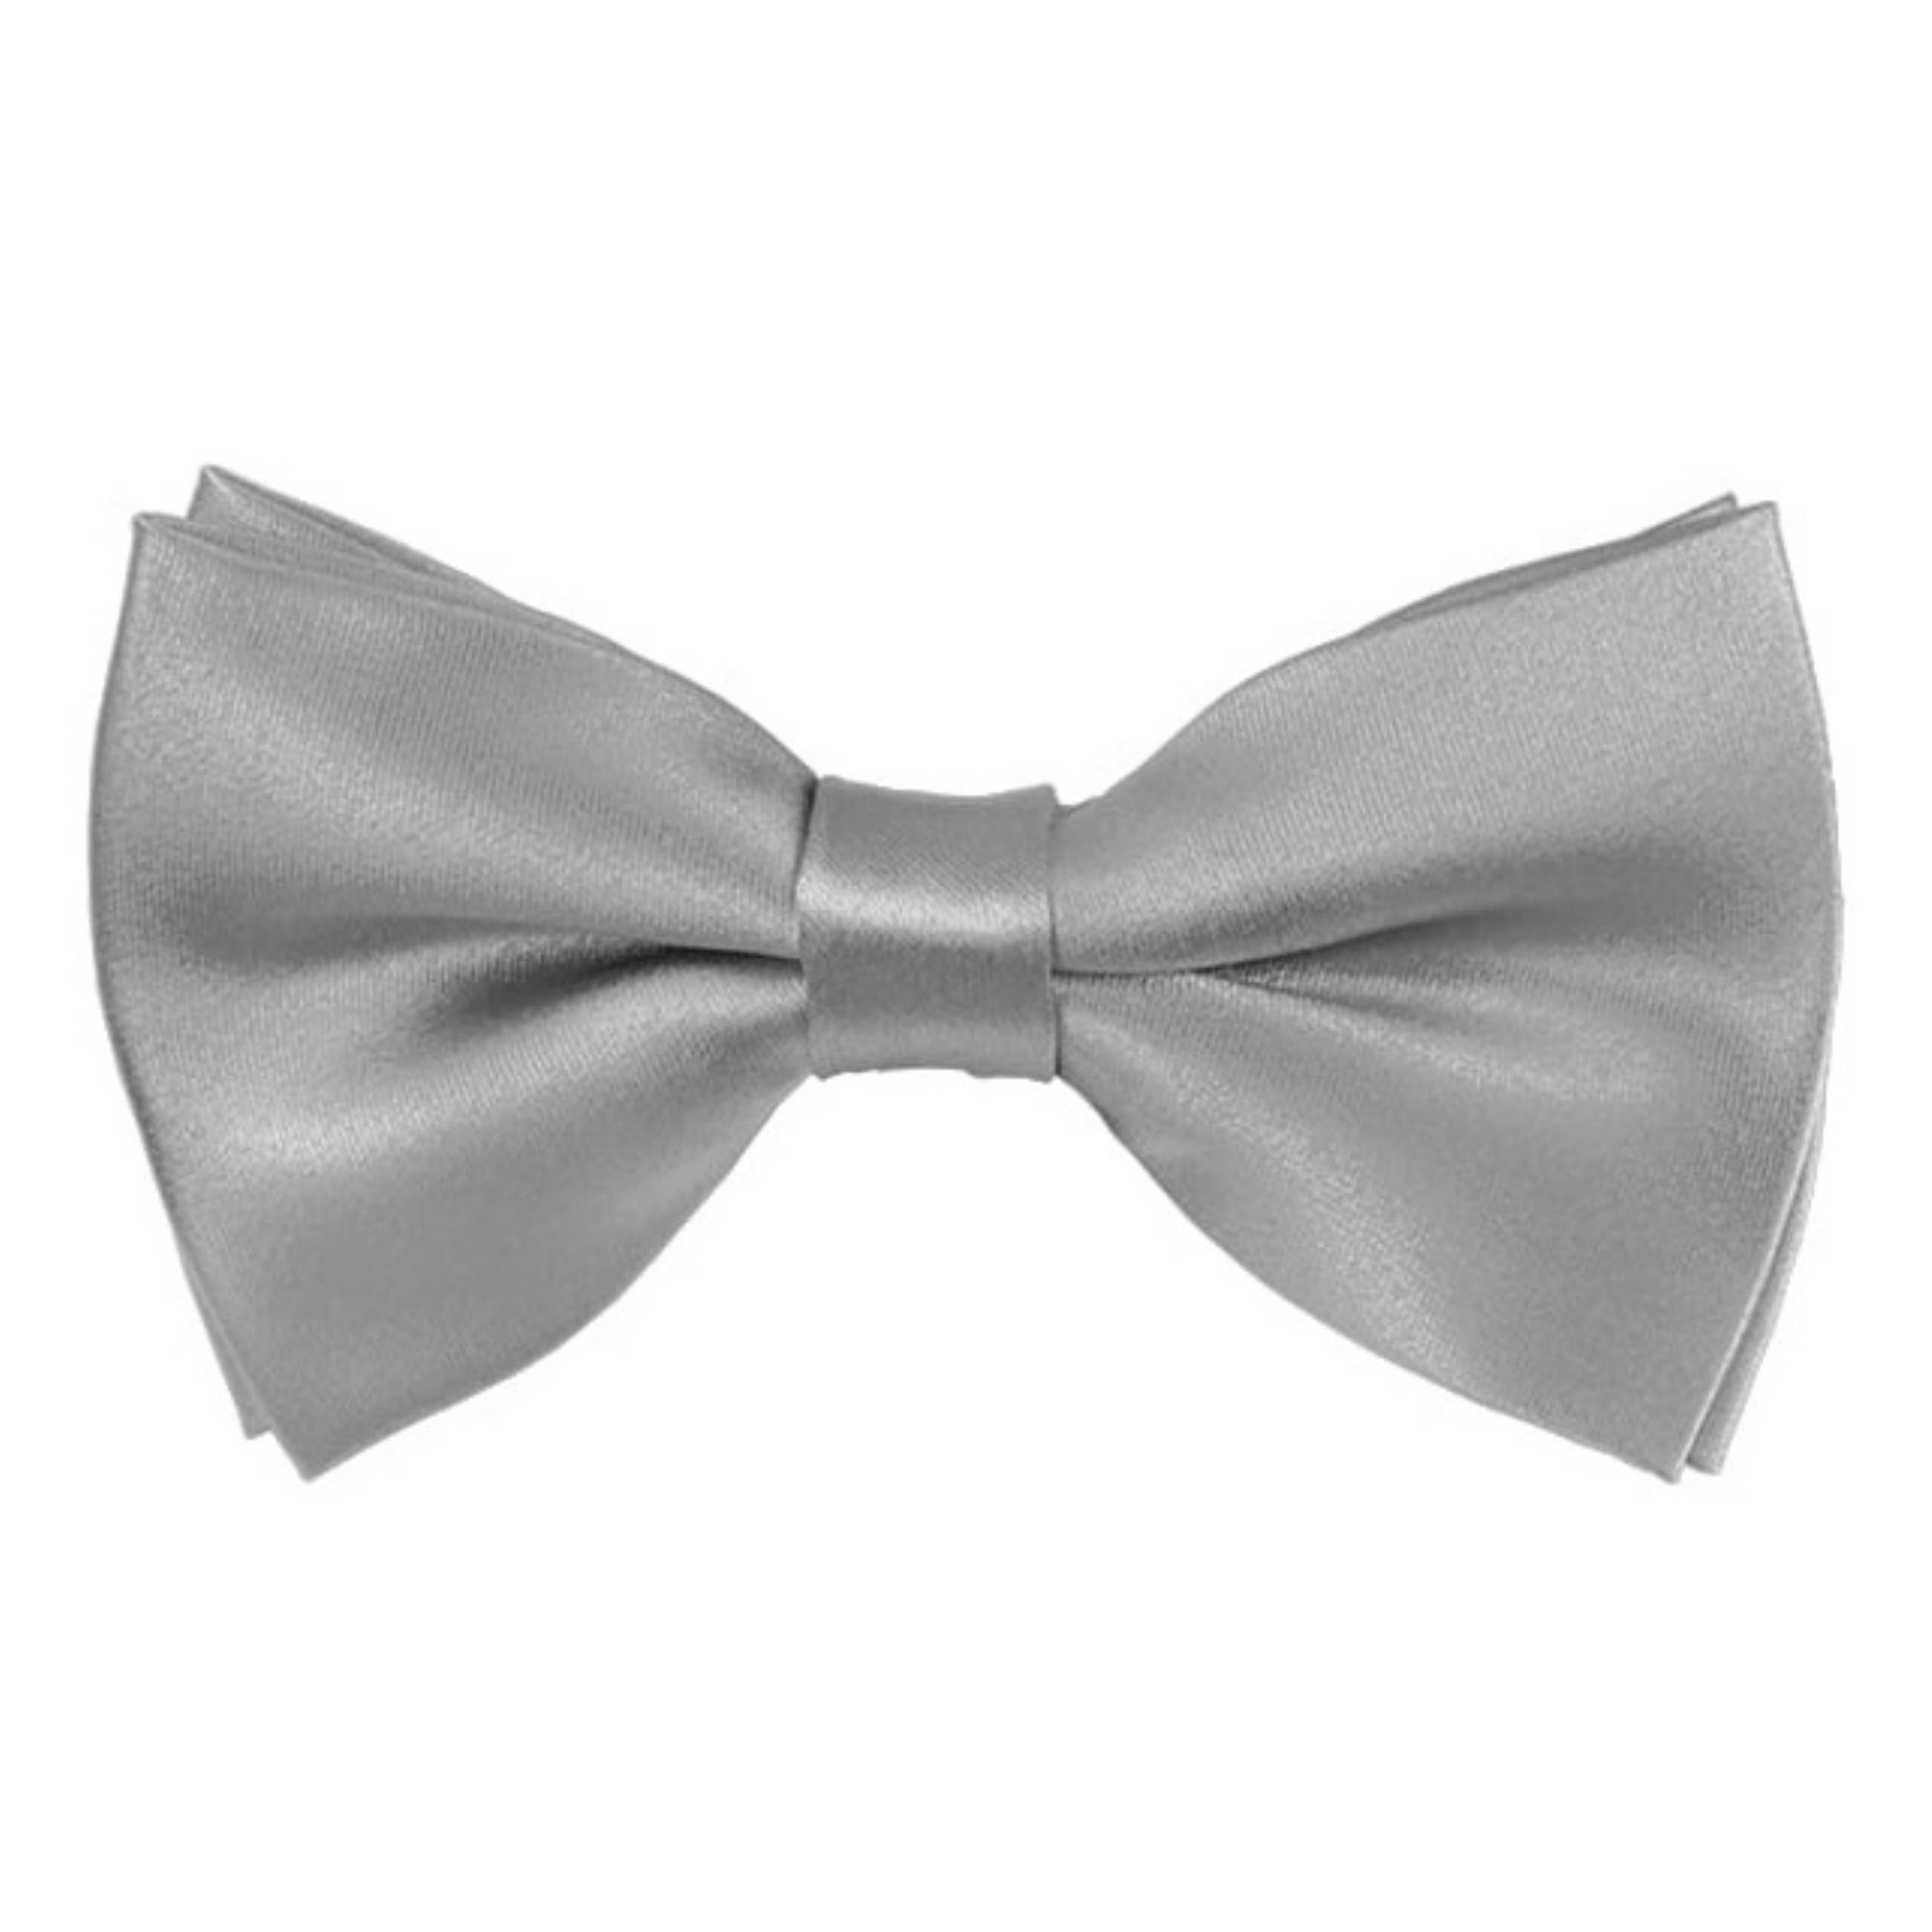 TheDapperTie Men's Solid Color 2.5 W And 4.5 L Inch Pre-Tied adjustable Bow Ties Men's Solid Color Bow Tie TheDapperTie Silver  